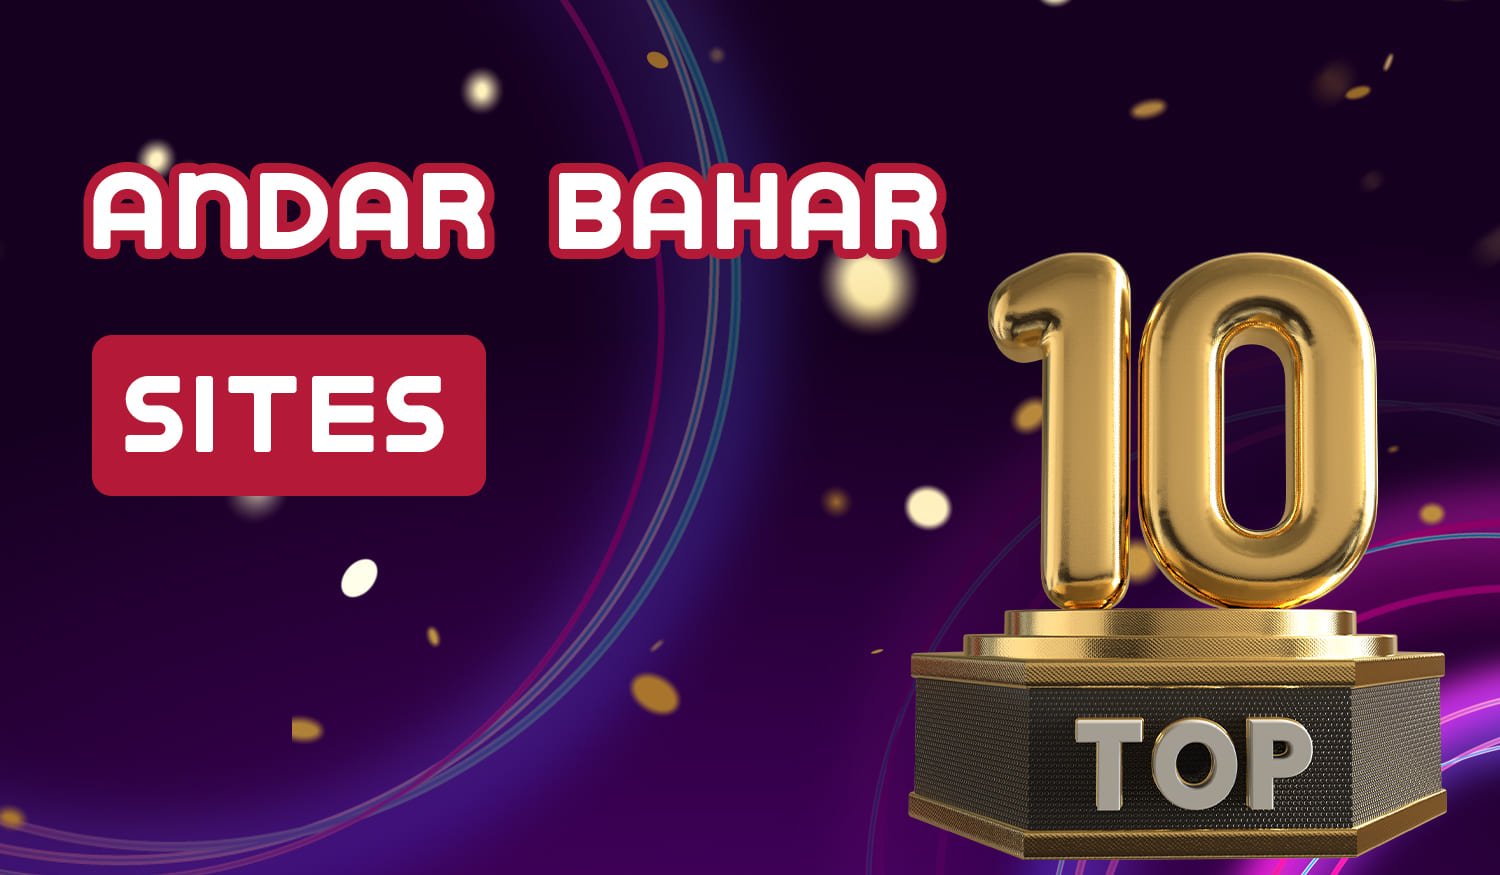 Top 10 sites available to play Andar Bahar online